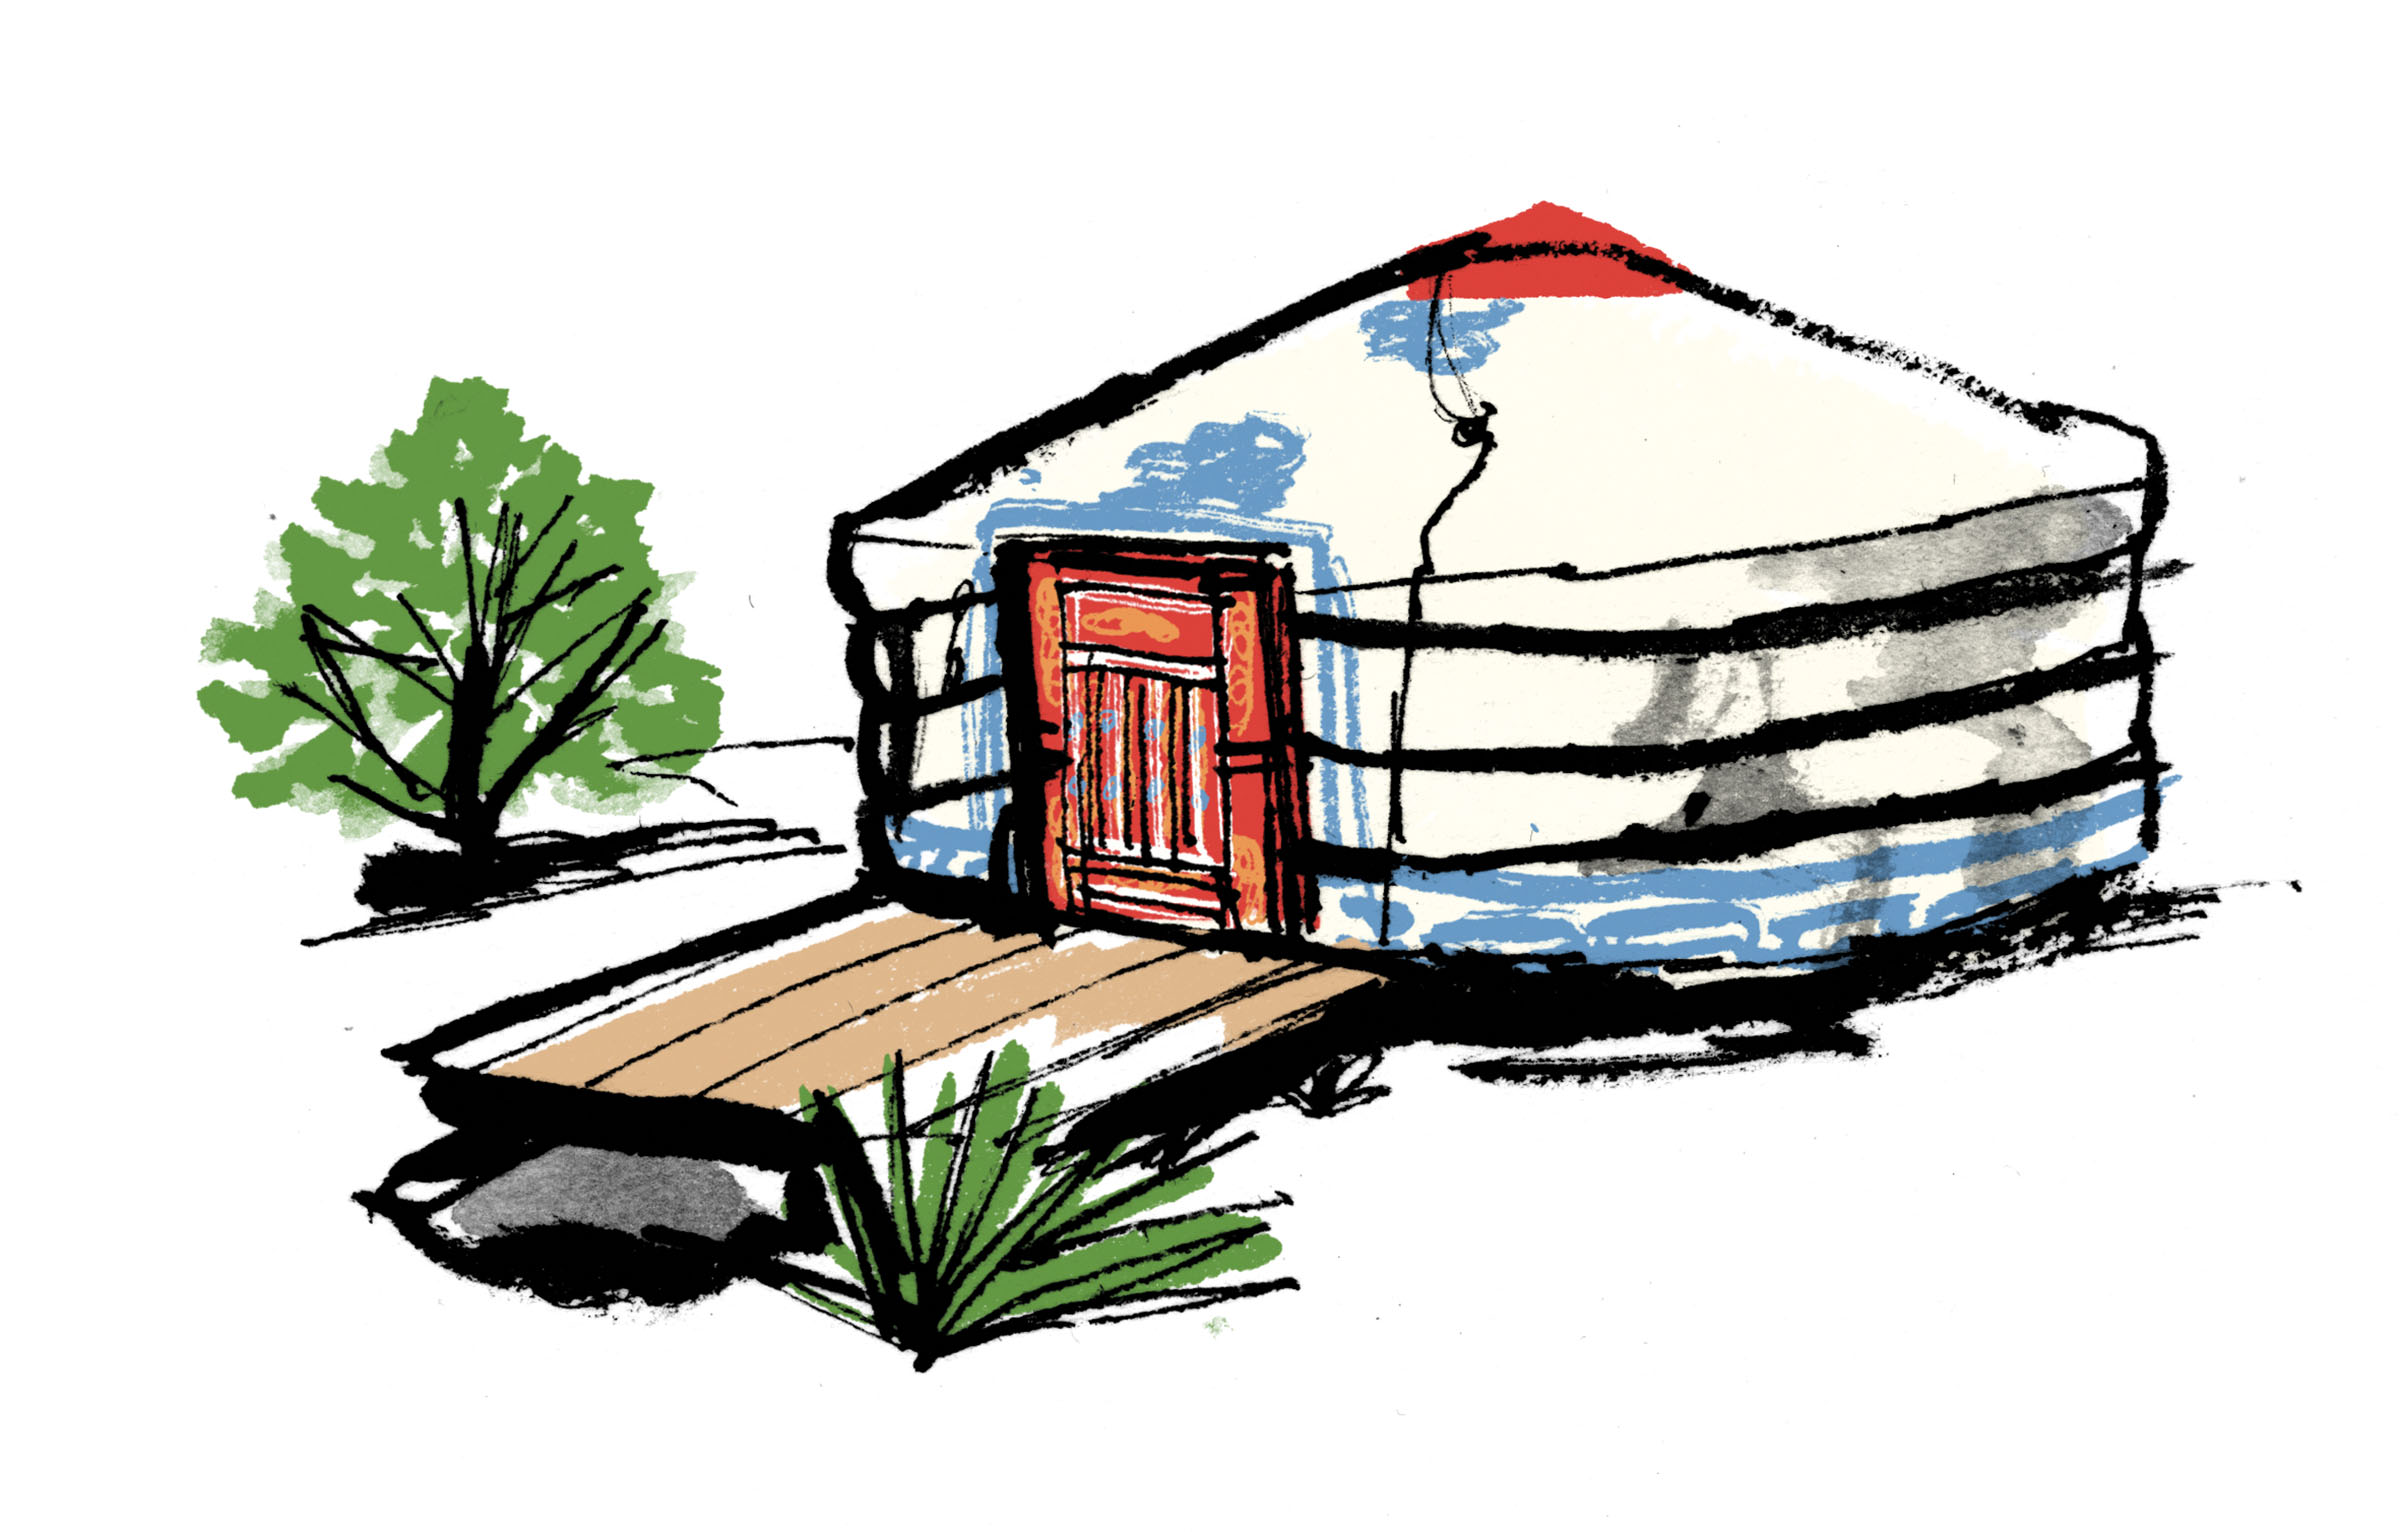 An illustration of a small white yurt